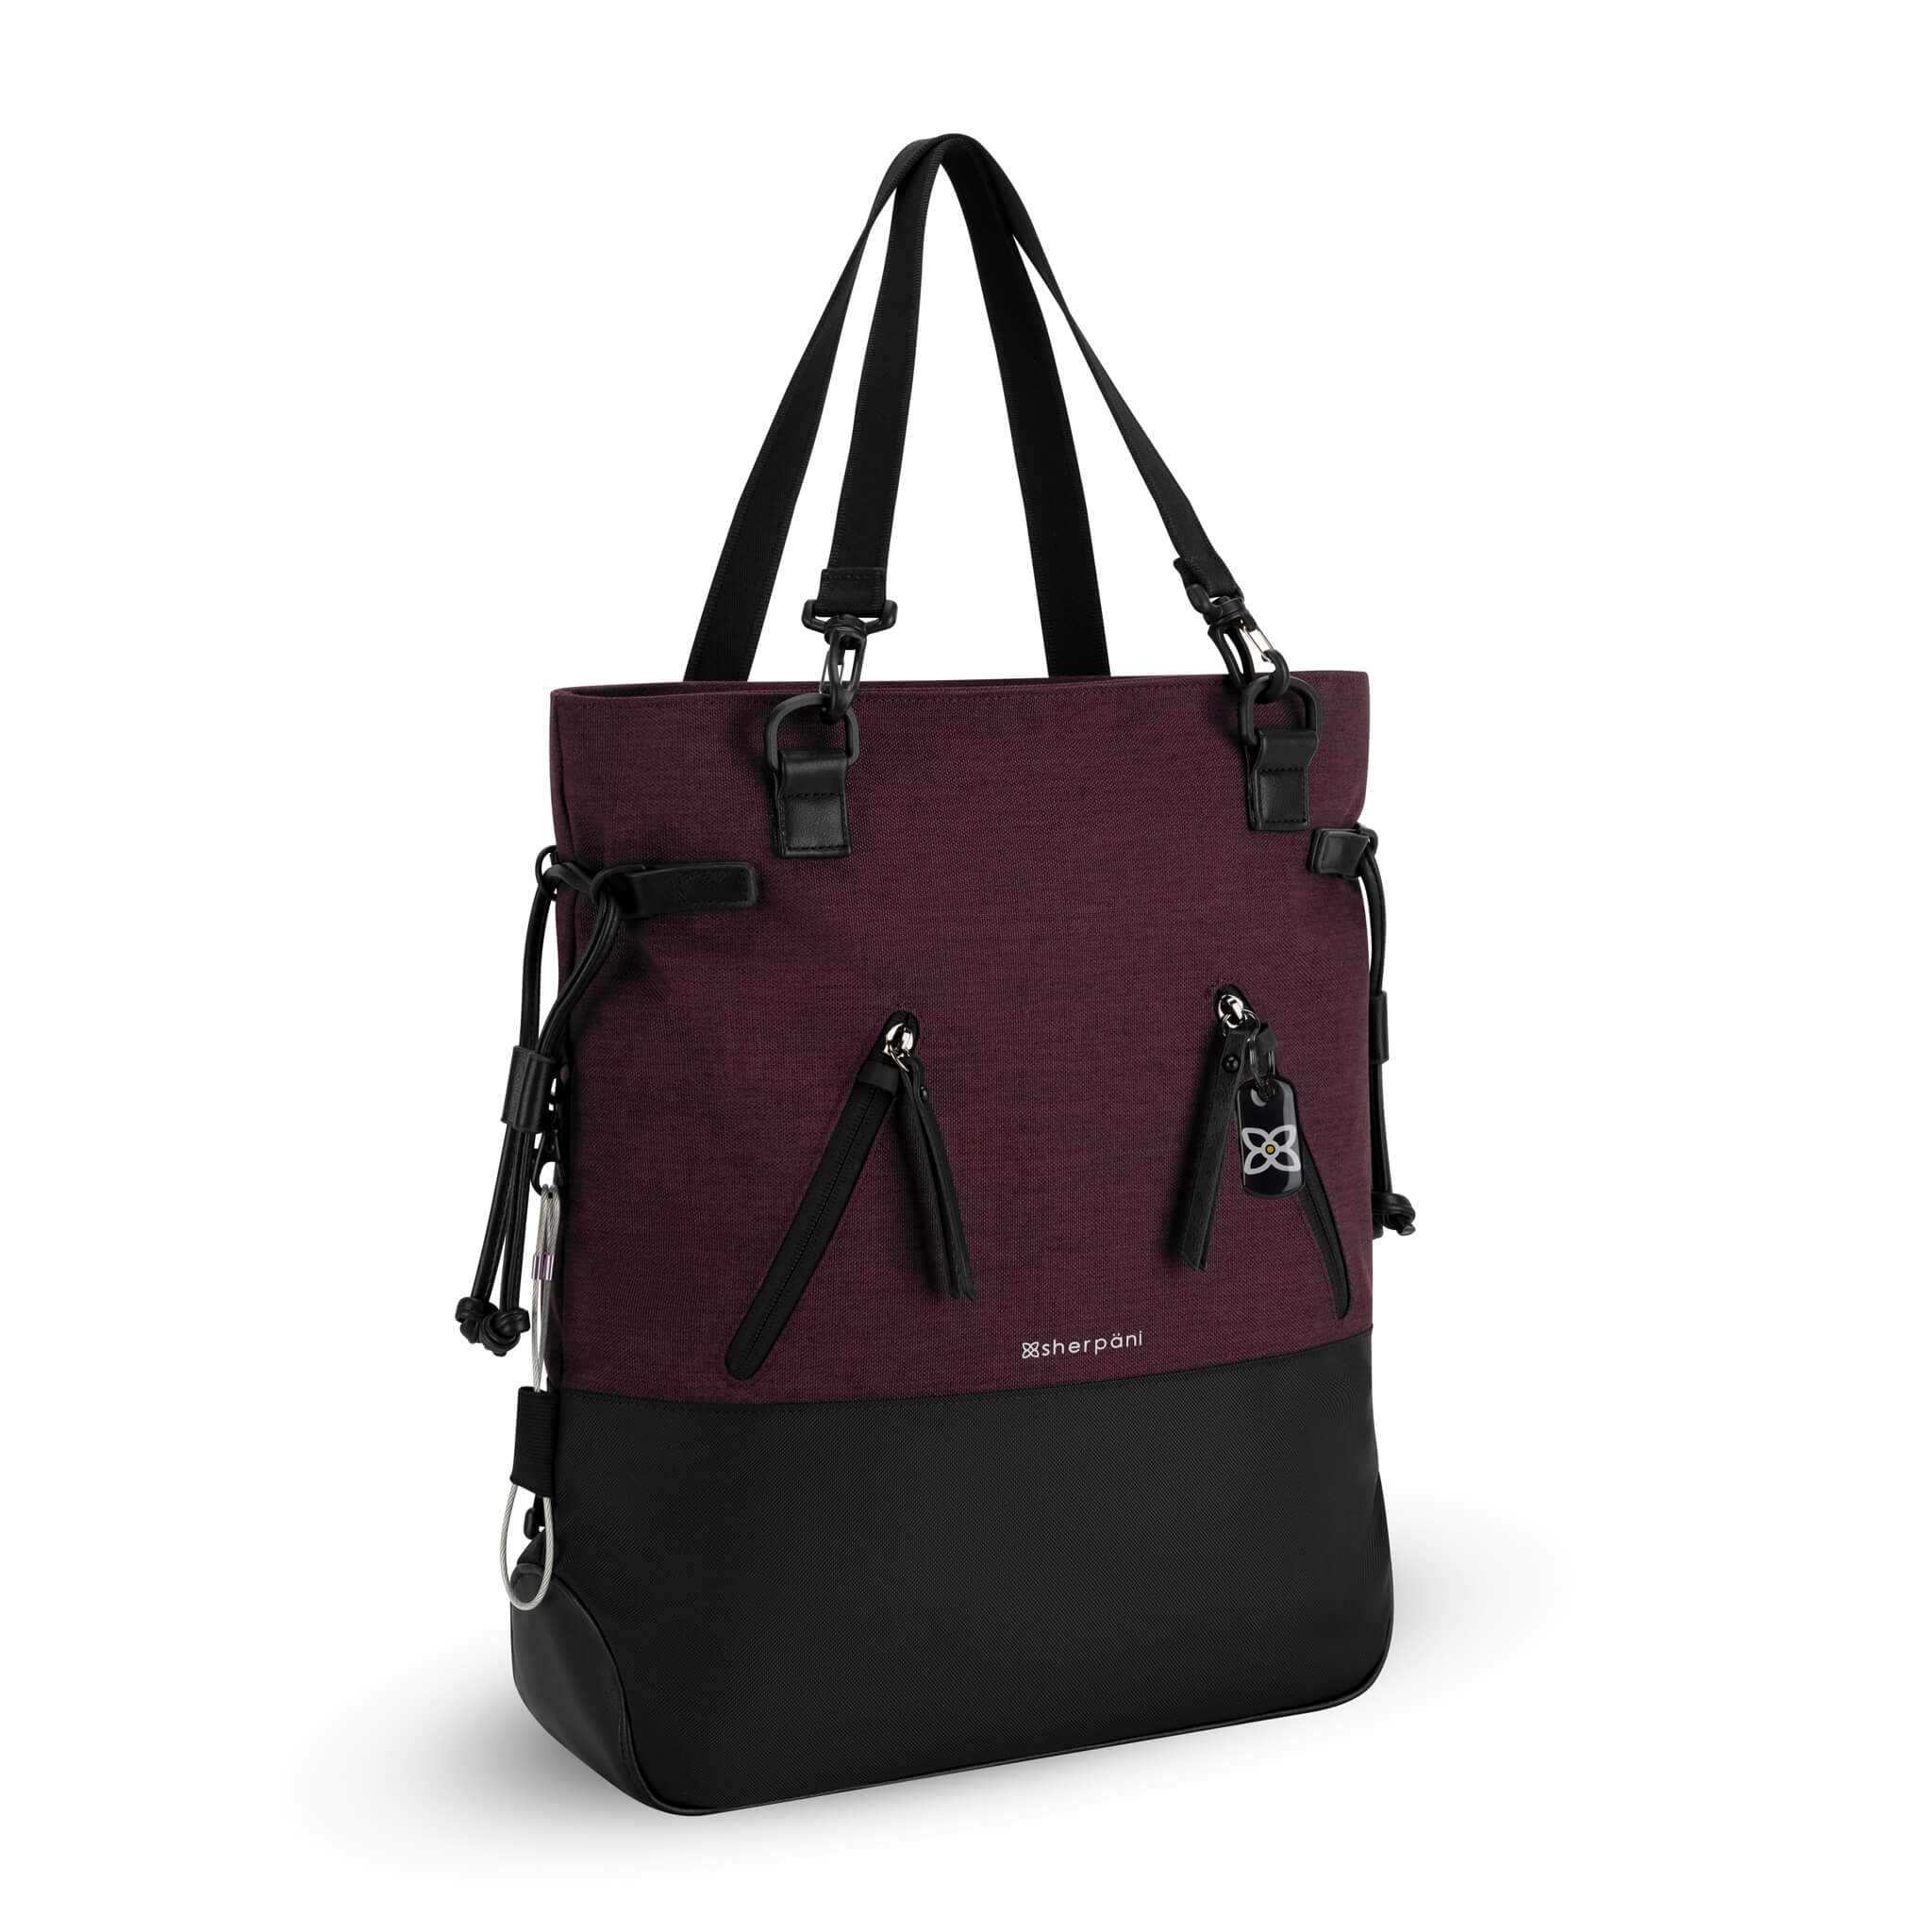 Angled front view of the Sherpani Anti-Theft tote backpack, the Tempest in Merlot. The convertible bag includes RFID protection, locking zipper pockets, adjustable straps, and a trolley sleeve. 